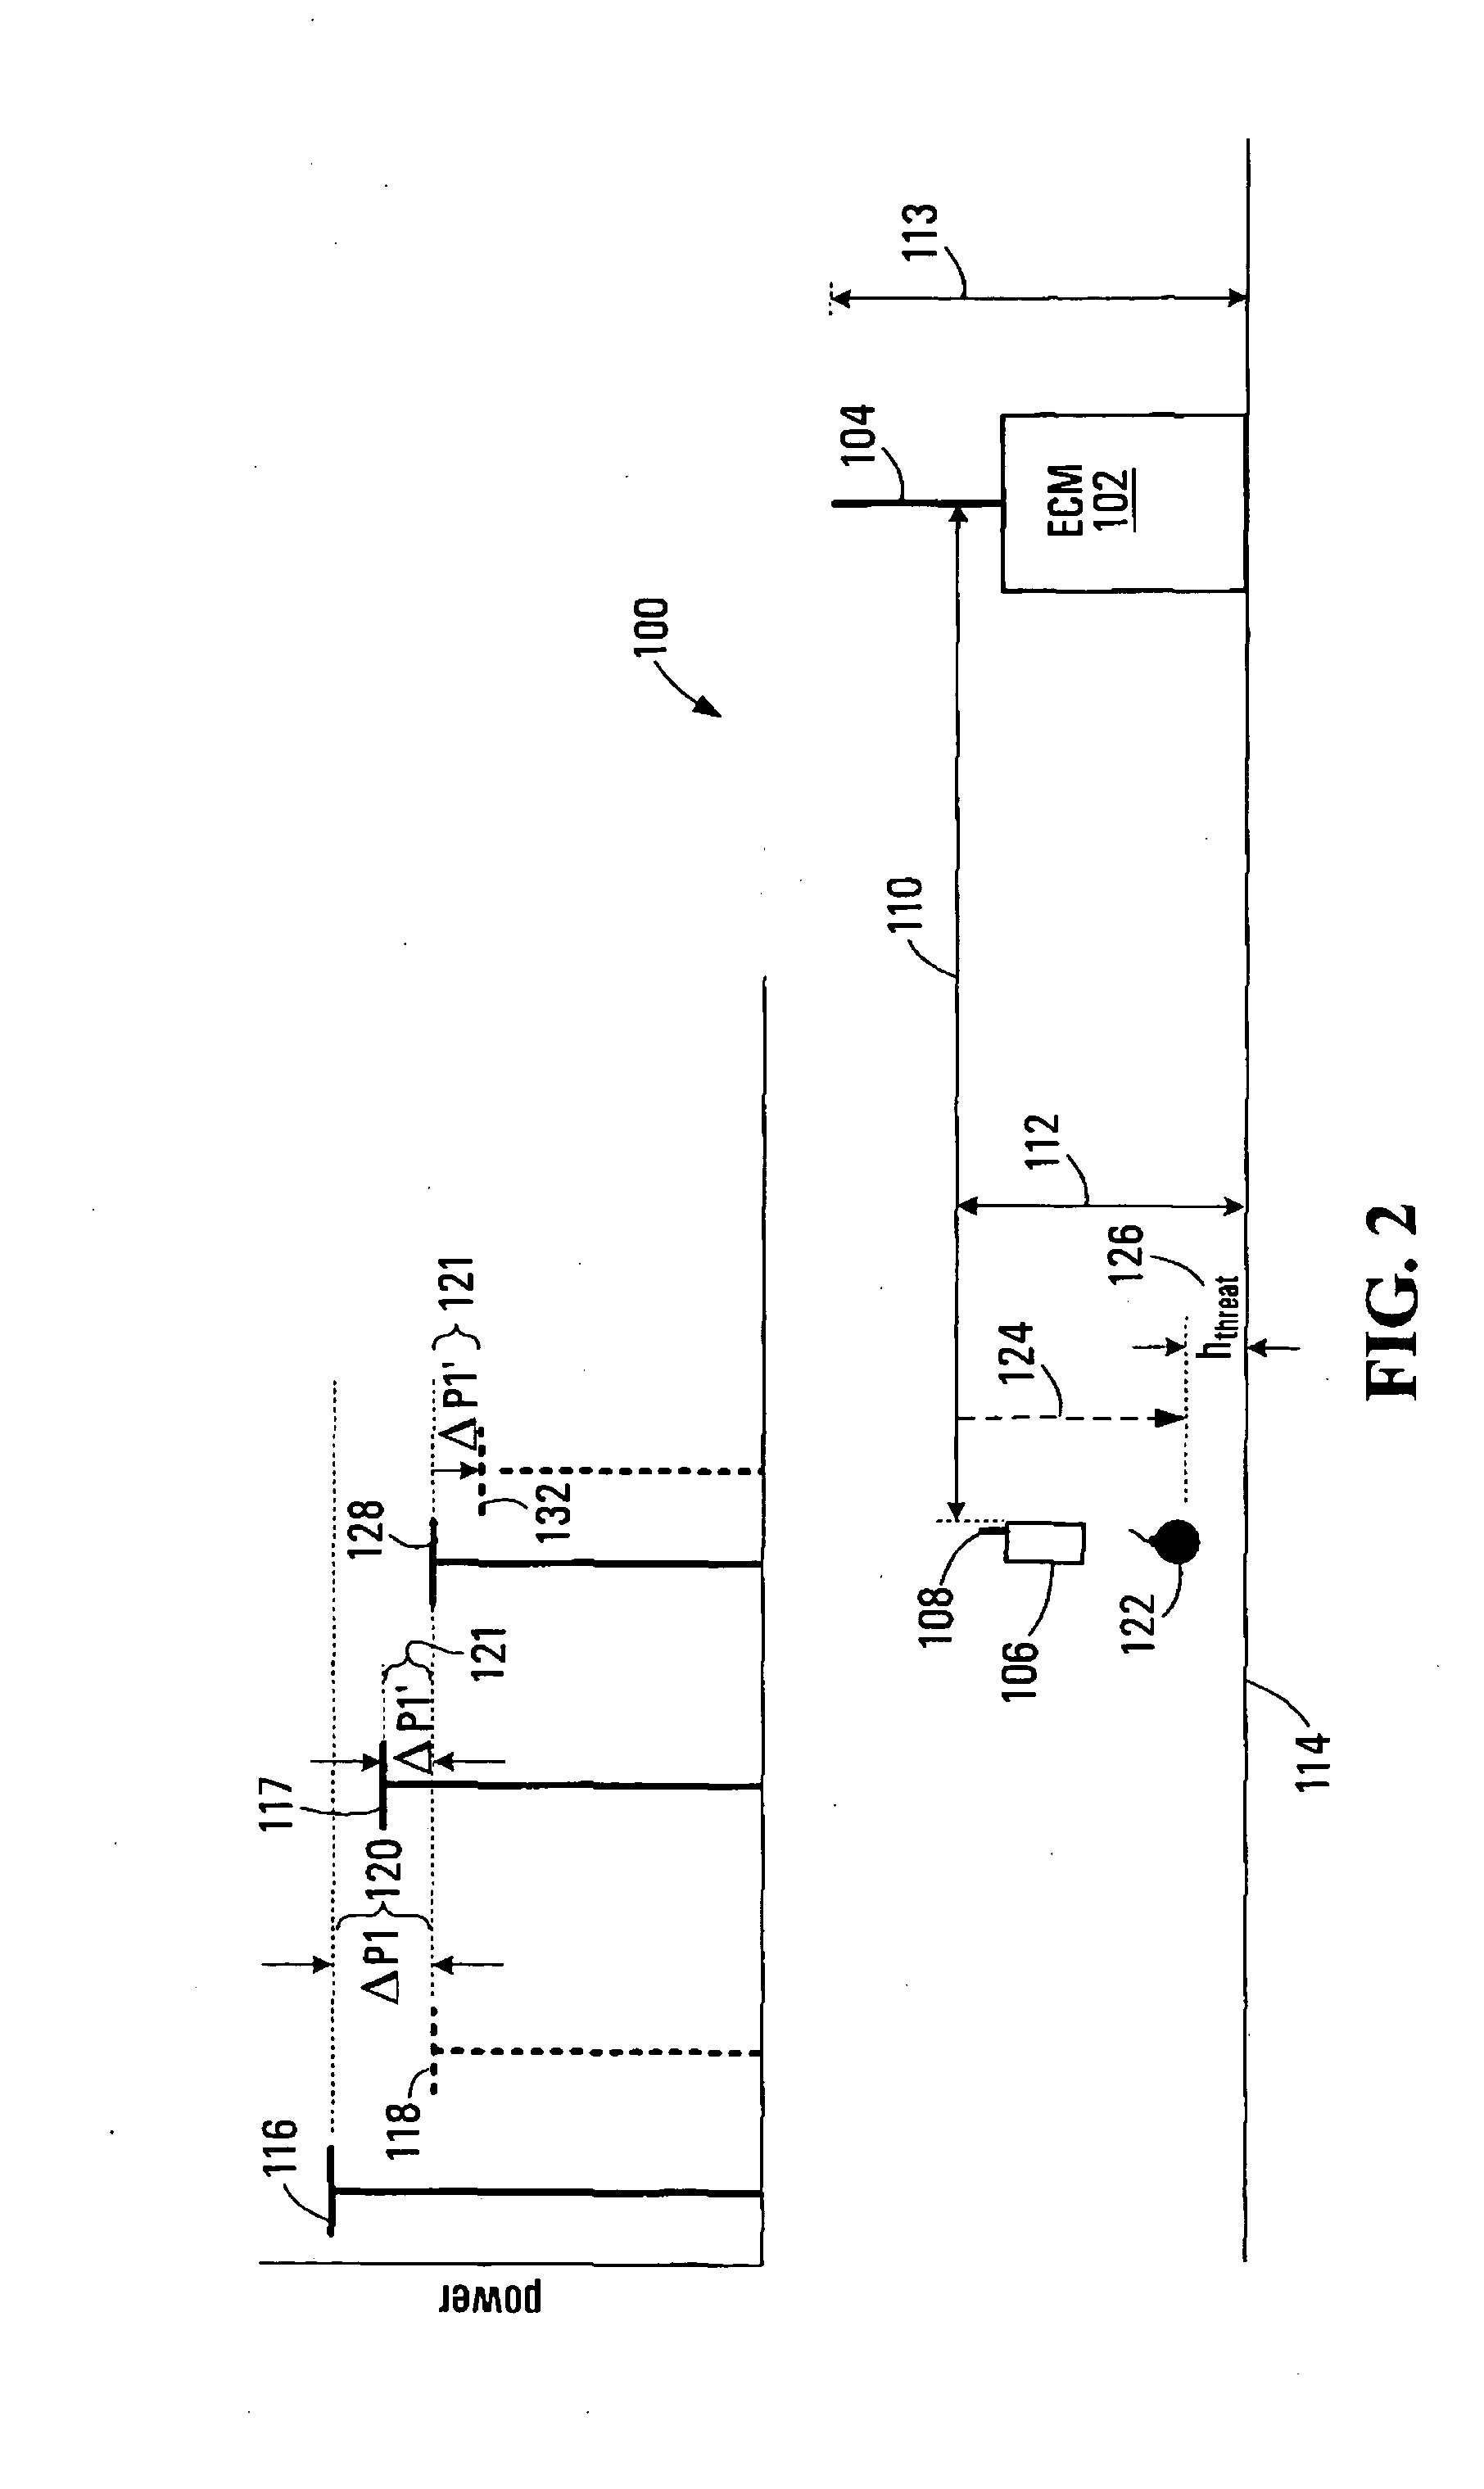 Method and device for estimation of the transmission characteristics of a radio frequency system